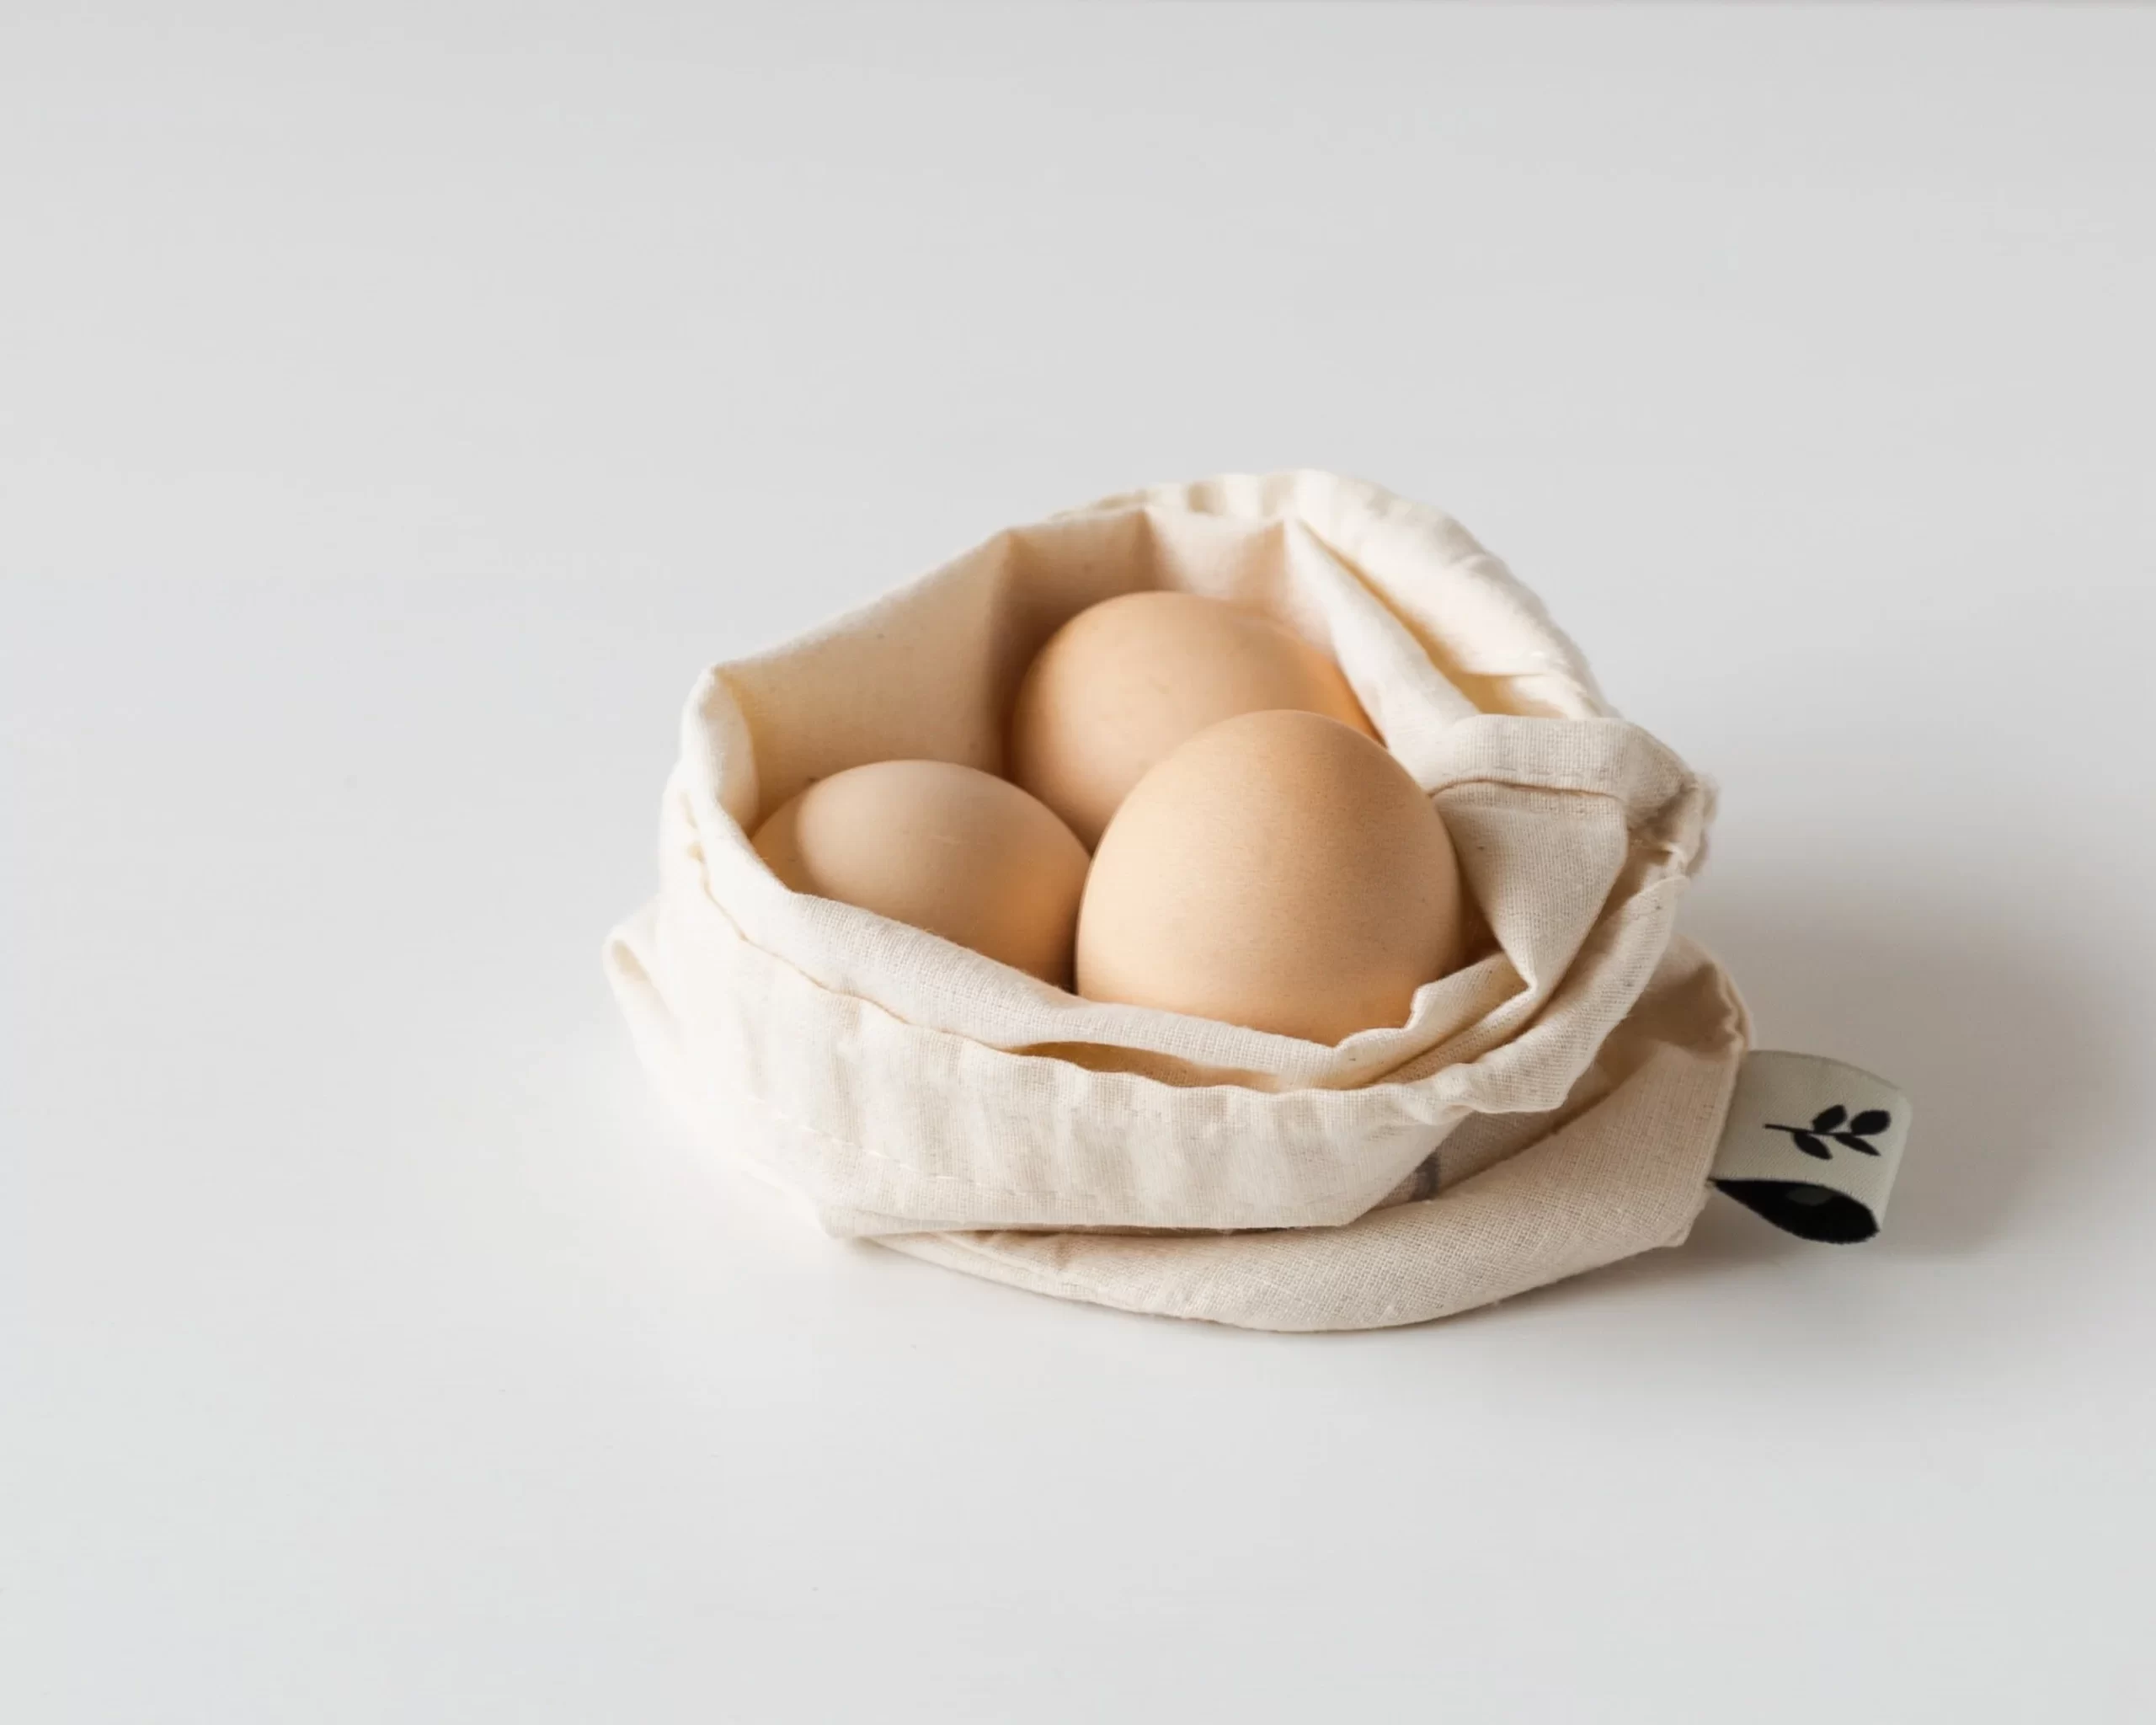 The egg: how much protein is in an egg? What are the benefits?